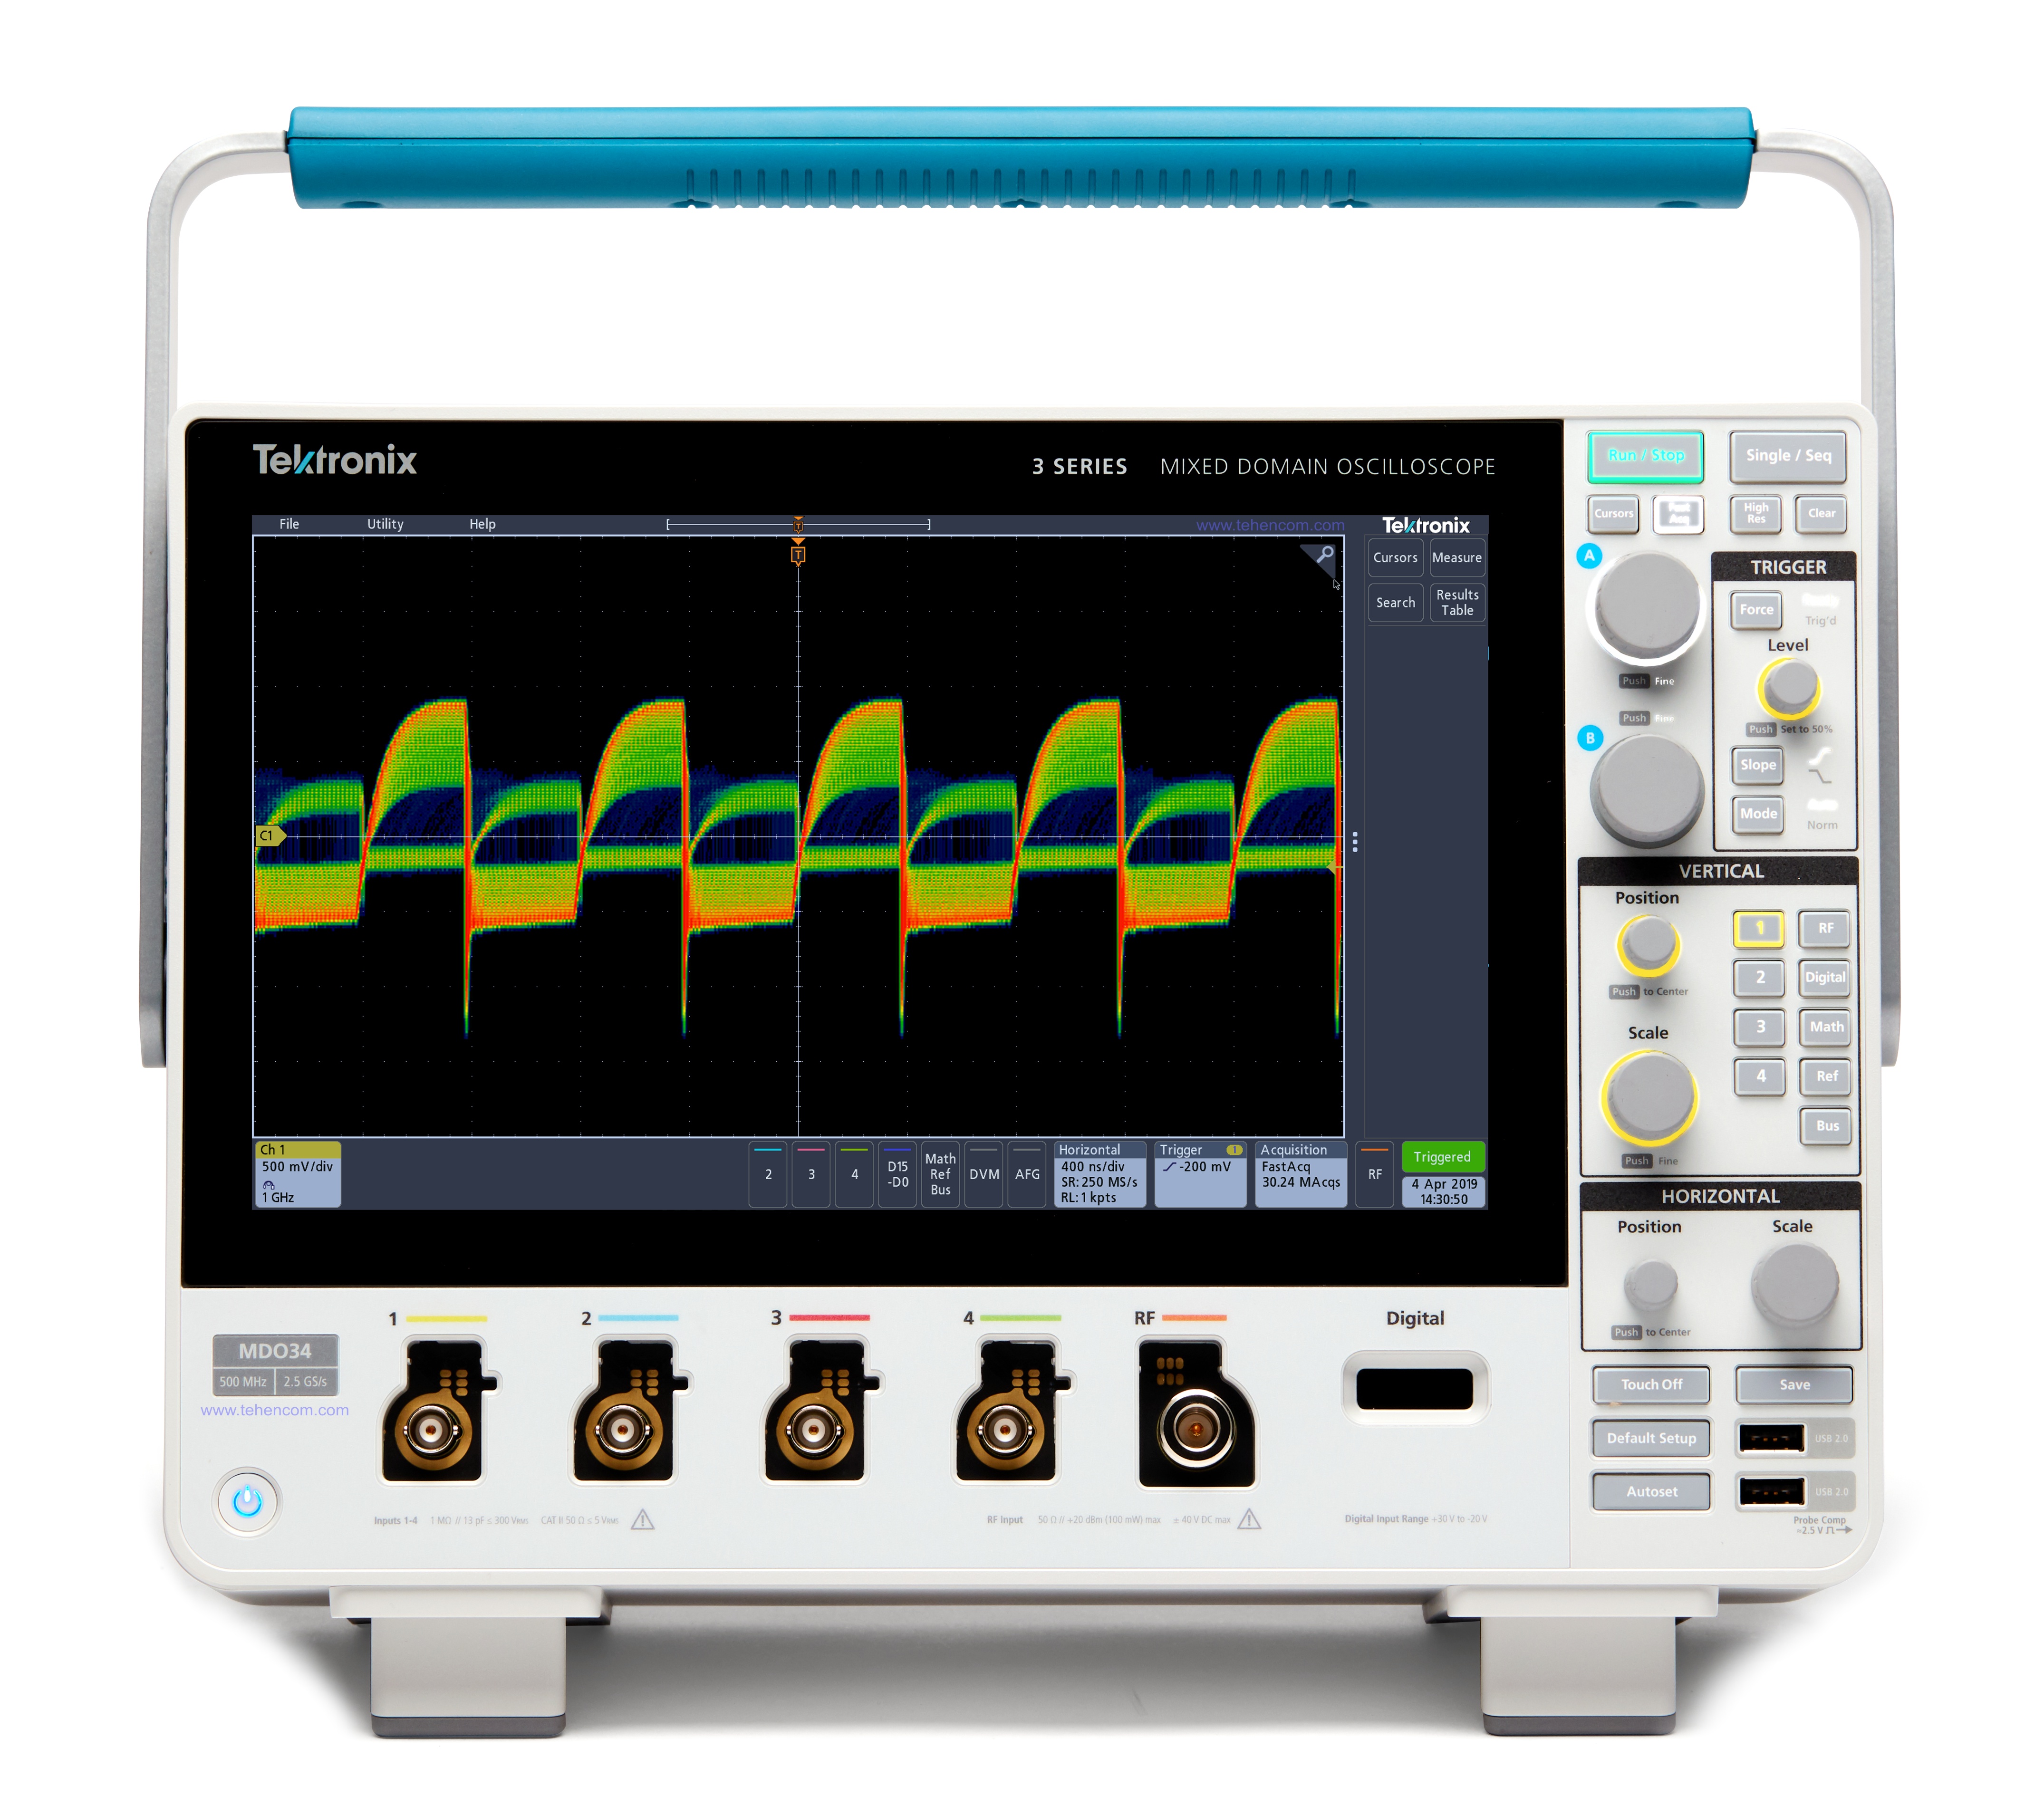 Tektronix MDO3 - a new series of oscilloscopes with an integrated spectrum analyzer